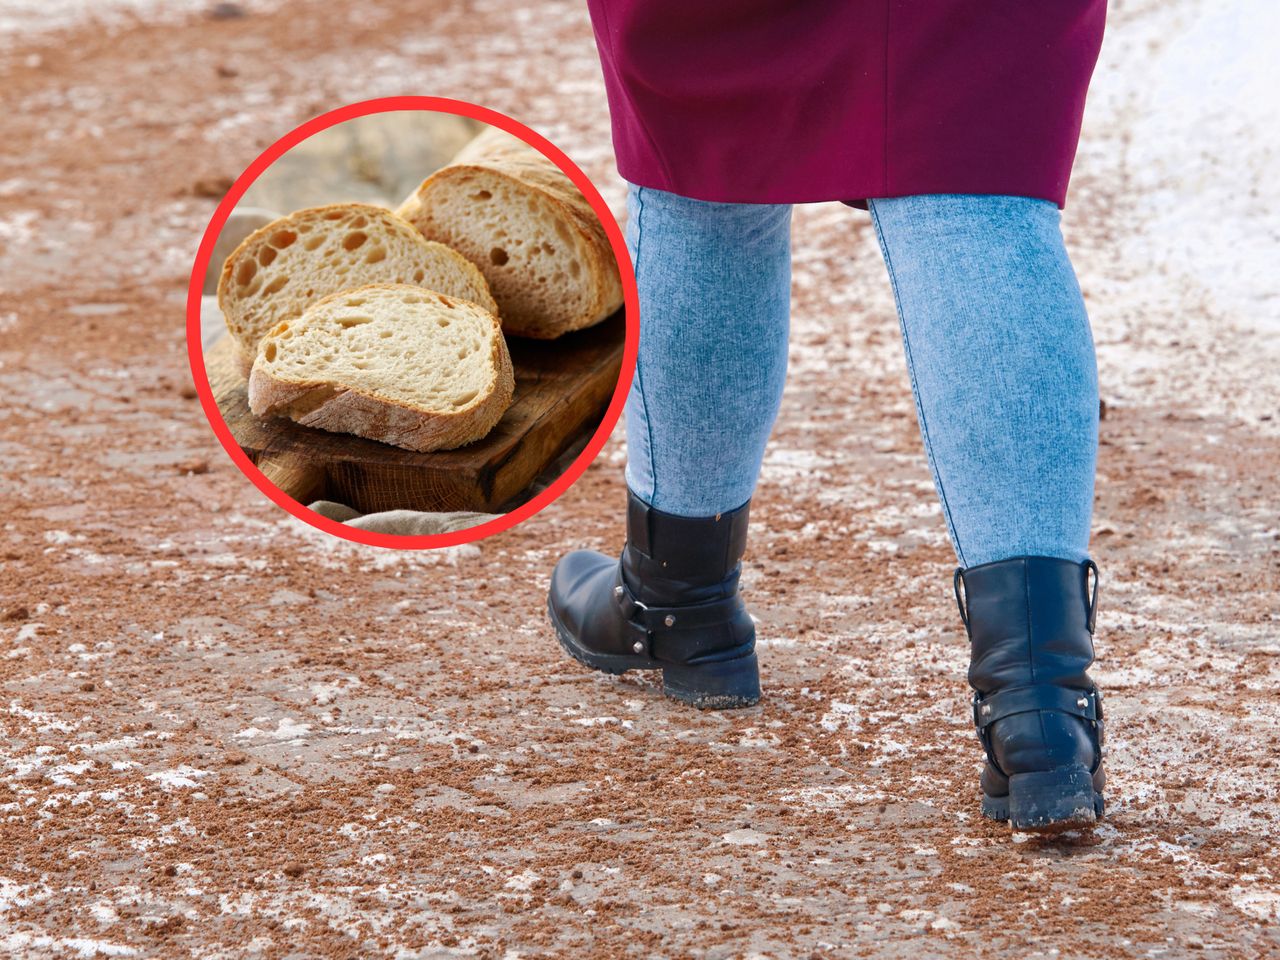 Say goodbye to salt stains on shoes with this bread crust trick